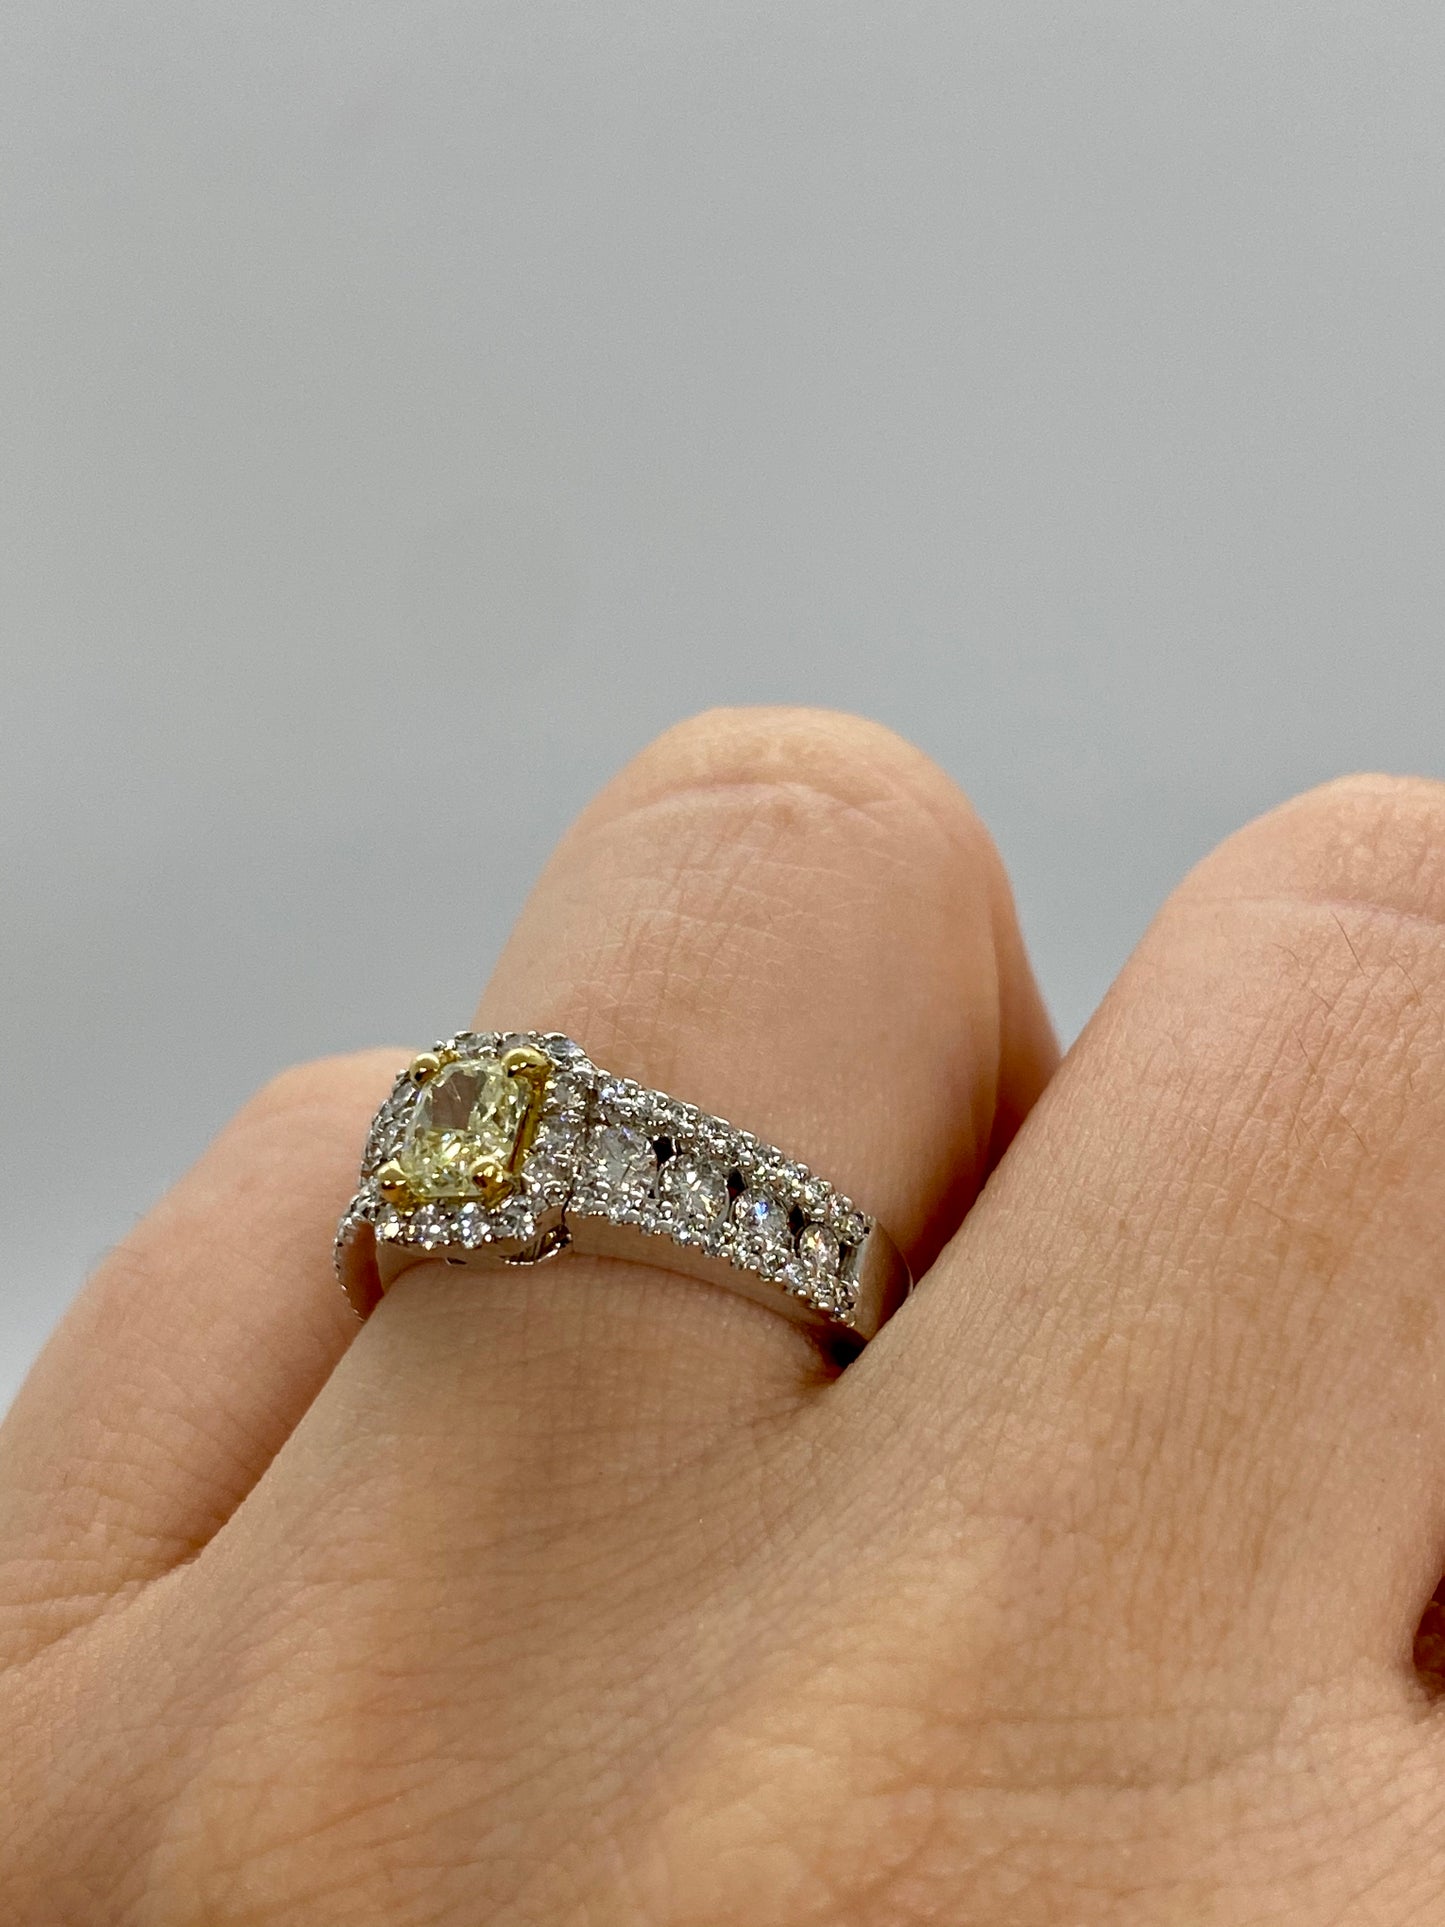 Yellow Diamond Ring R15554 - Royal Gems and Jewelry